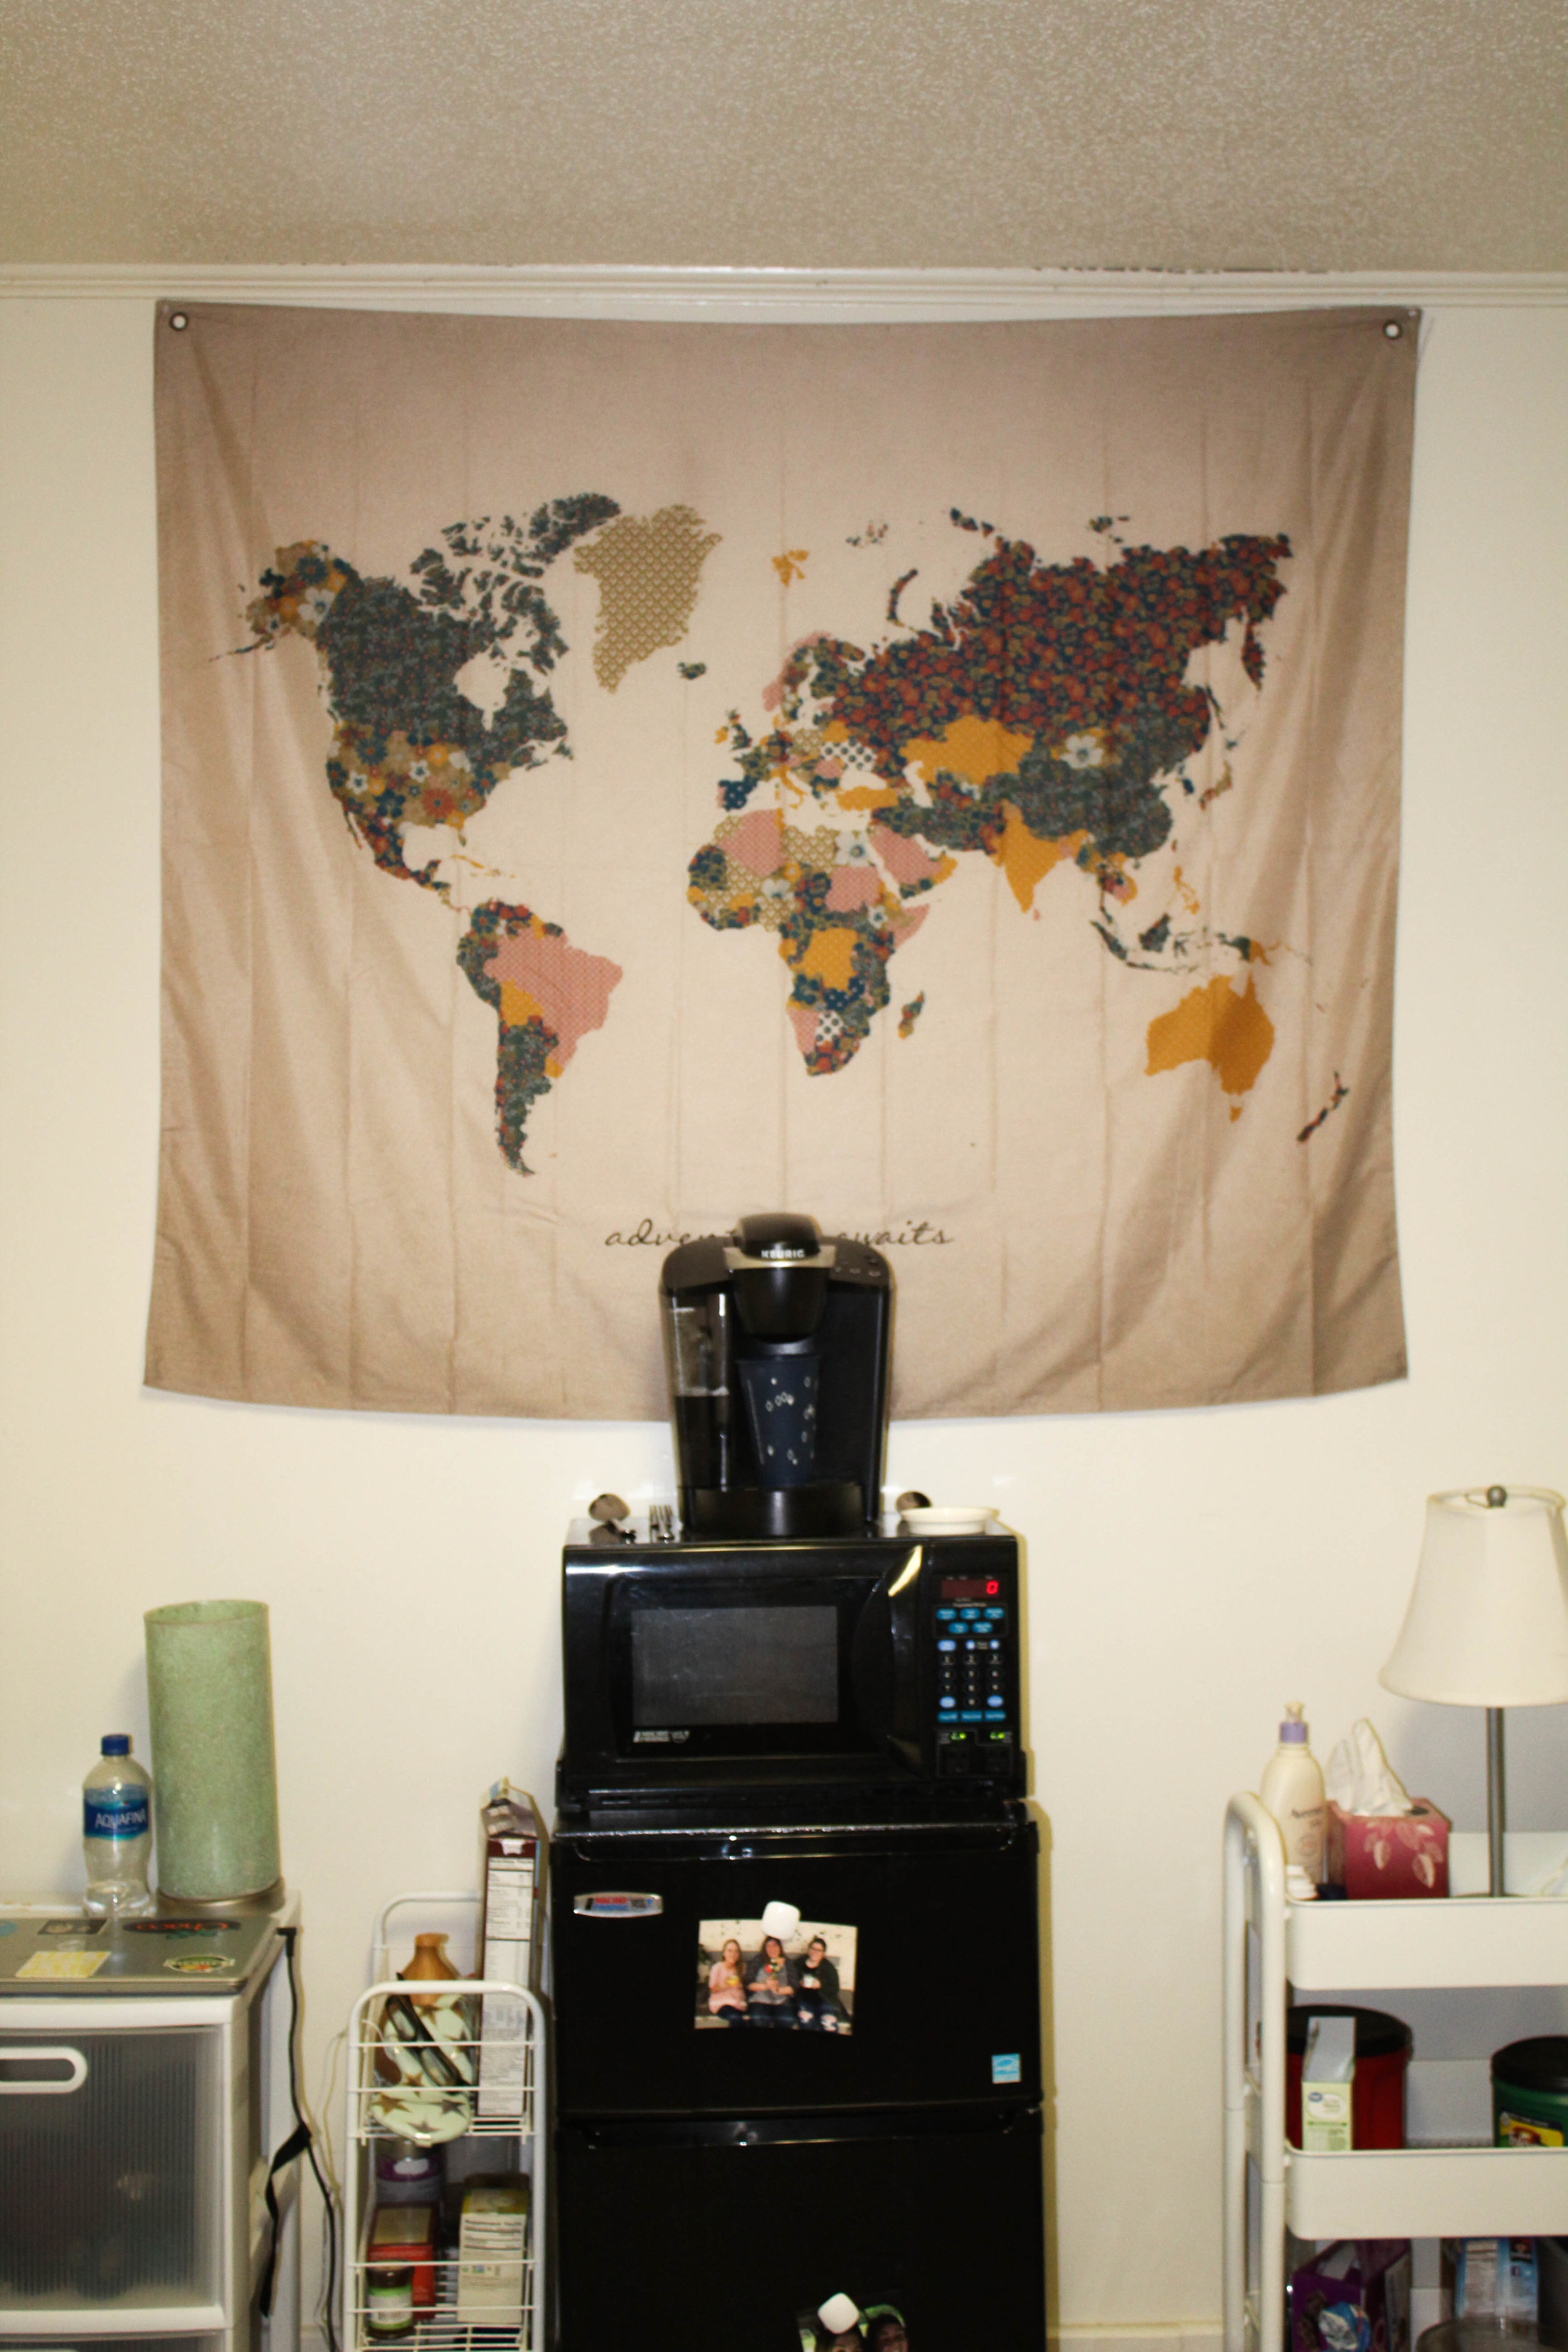 Kaitlyn Coleman, junior, has a tapestry hanging behind her coffeemaker, showing off her personal style.